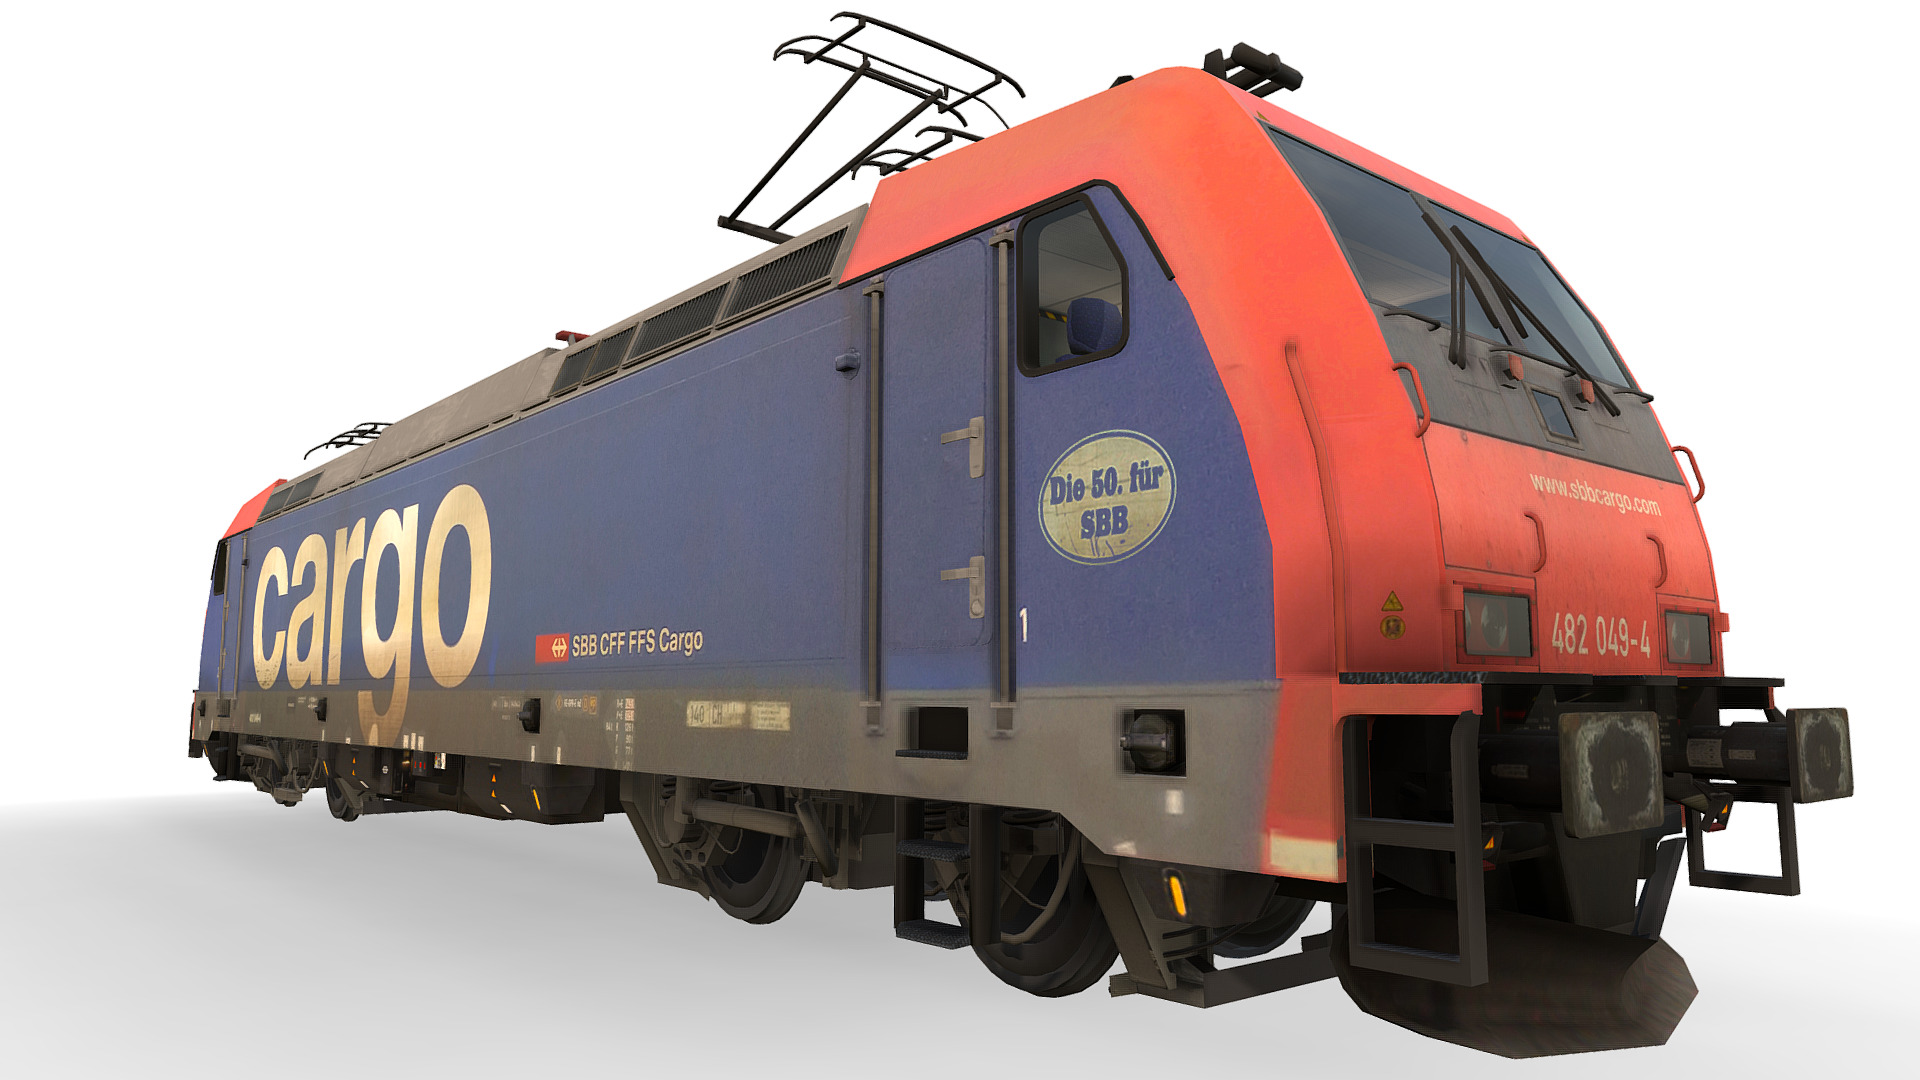 3D model Locomotive Class 185 – RE482 049-4 – SBB - This is a 3D model of the Locomotive Class 185 - RE482 049-4 - SBB. The 3D model is about a red train with blue and yellow text.